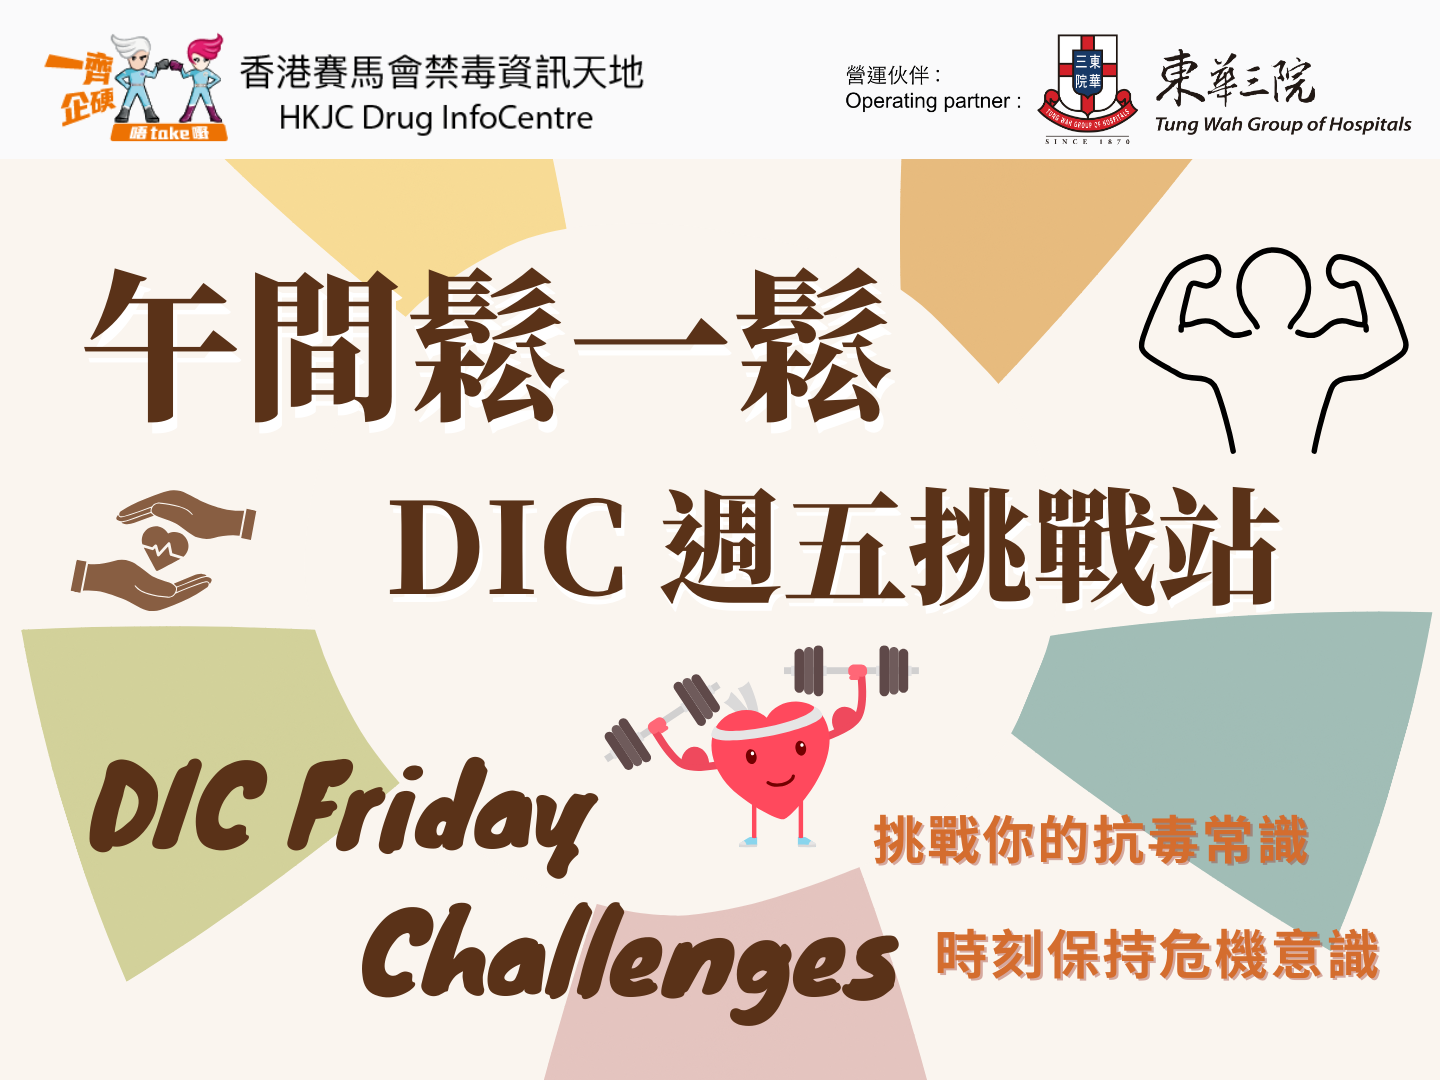 DIC Friday Challenges